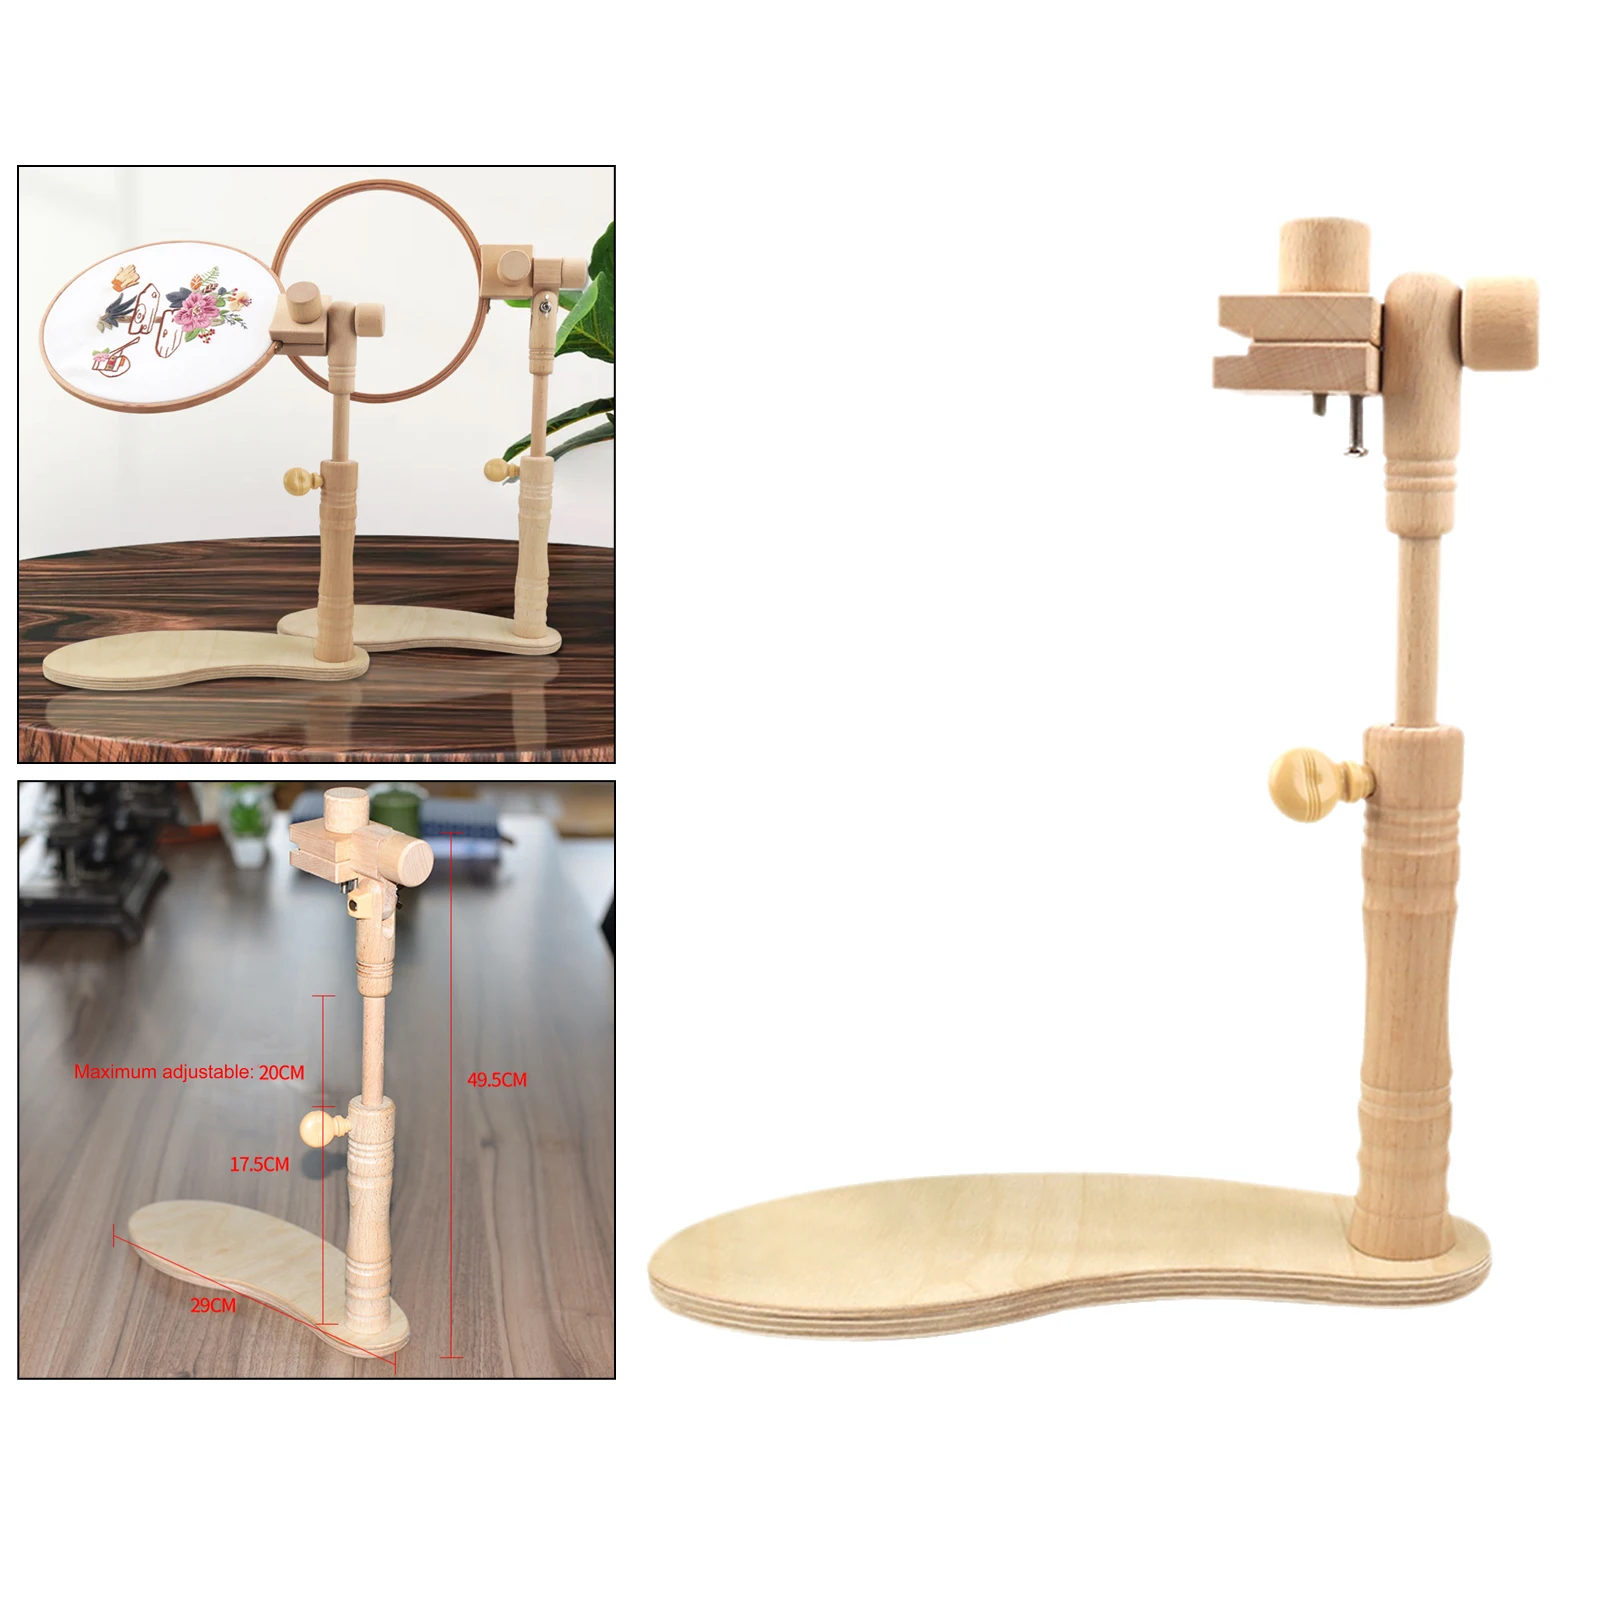 Wood Cross Stitch Rack Embroidery Desktop Stand Hoop Craft Projects Frame